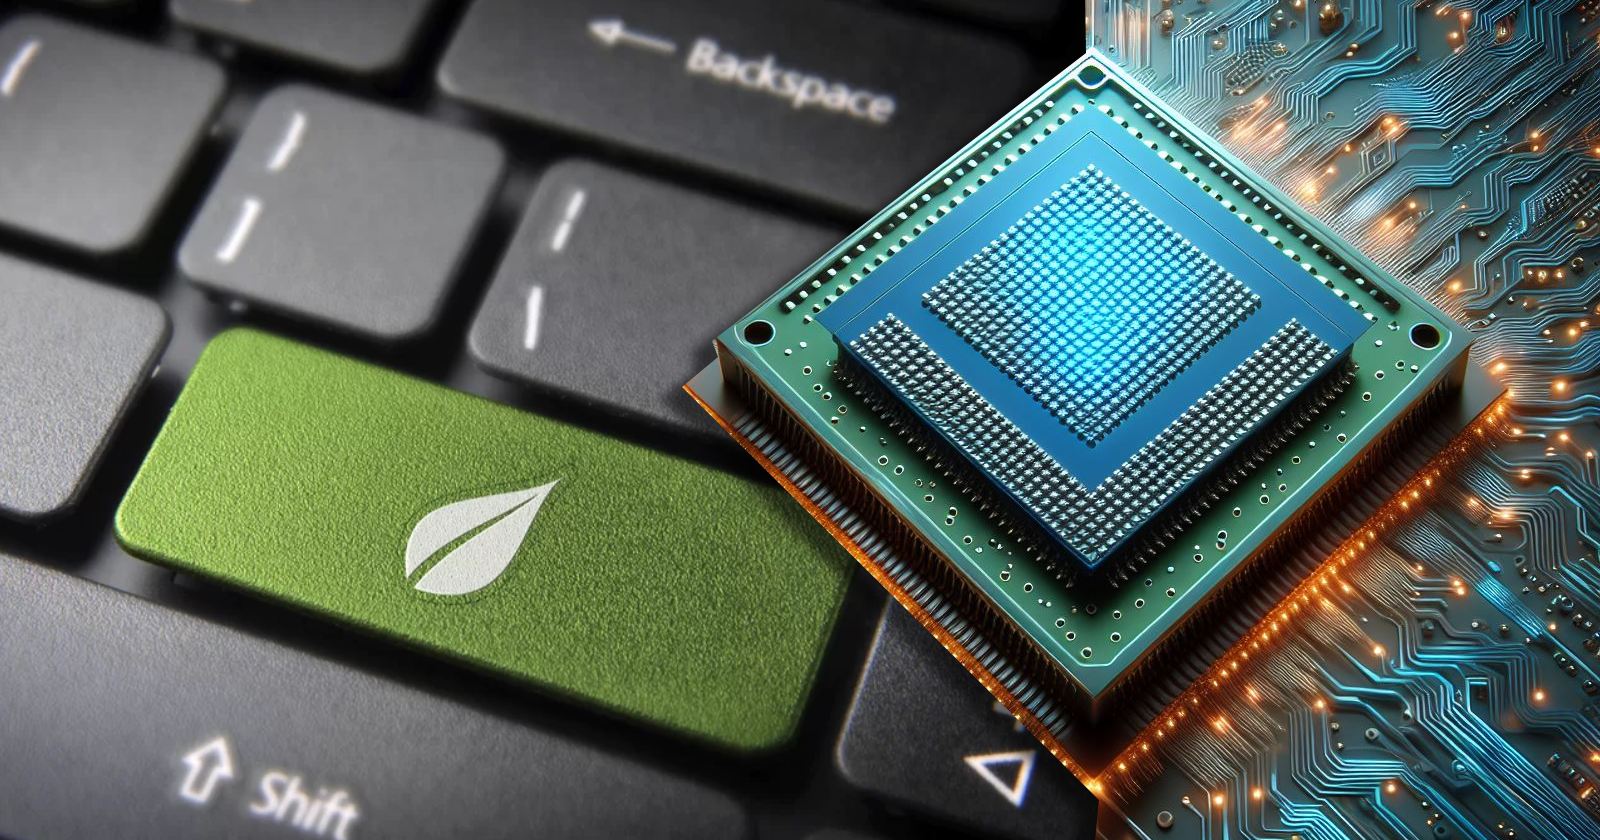 This processor consumes 99% less power! Here are its features.